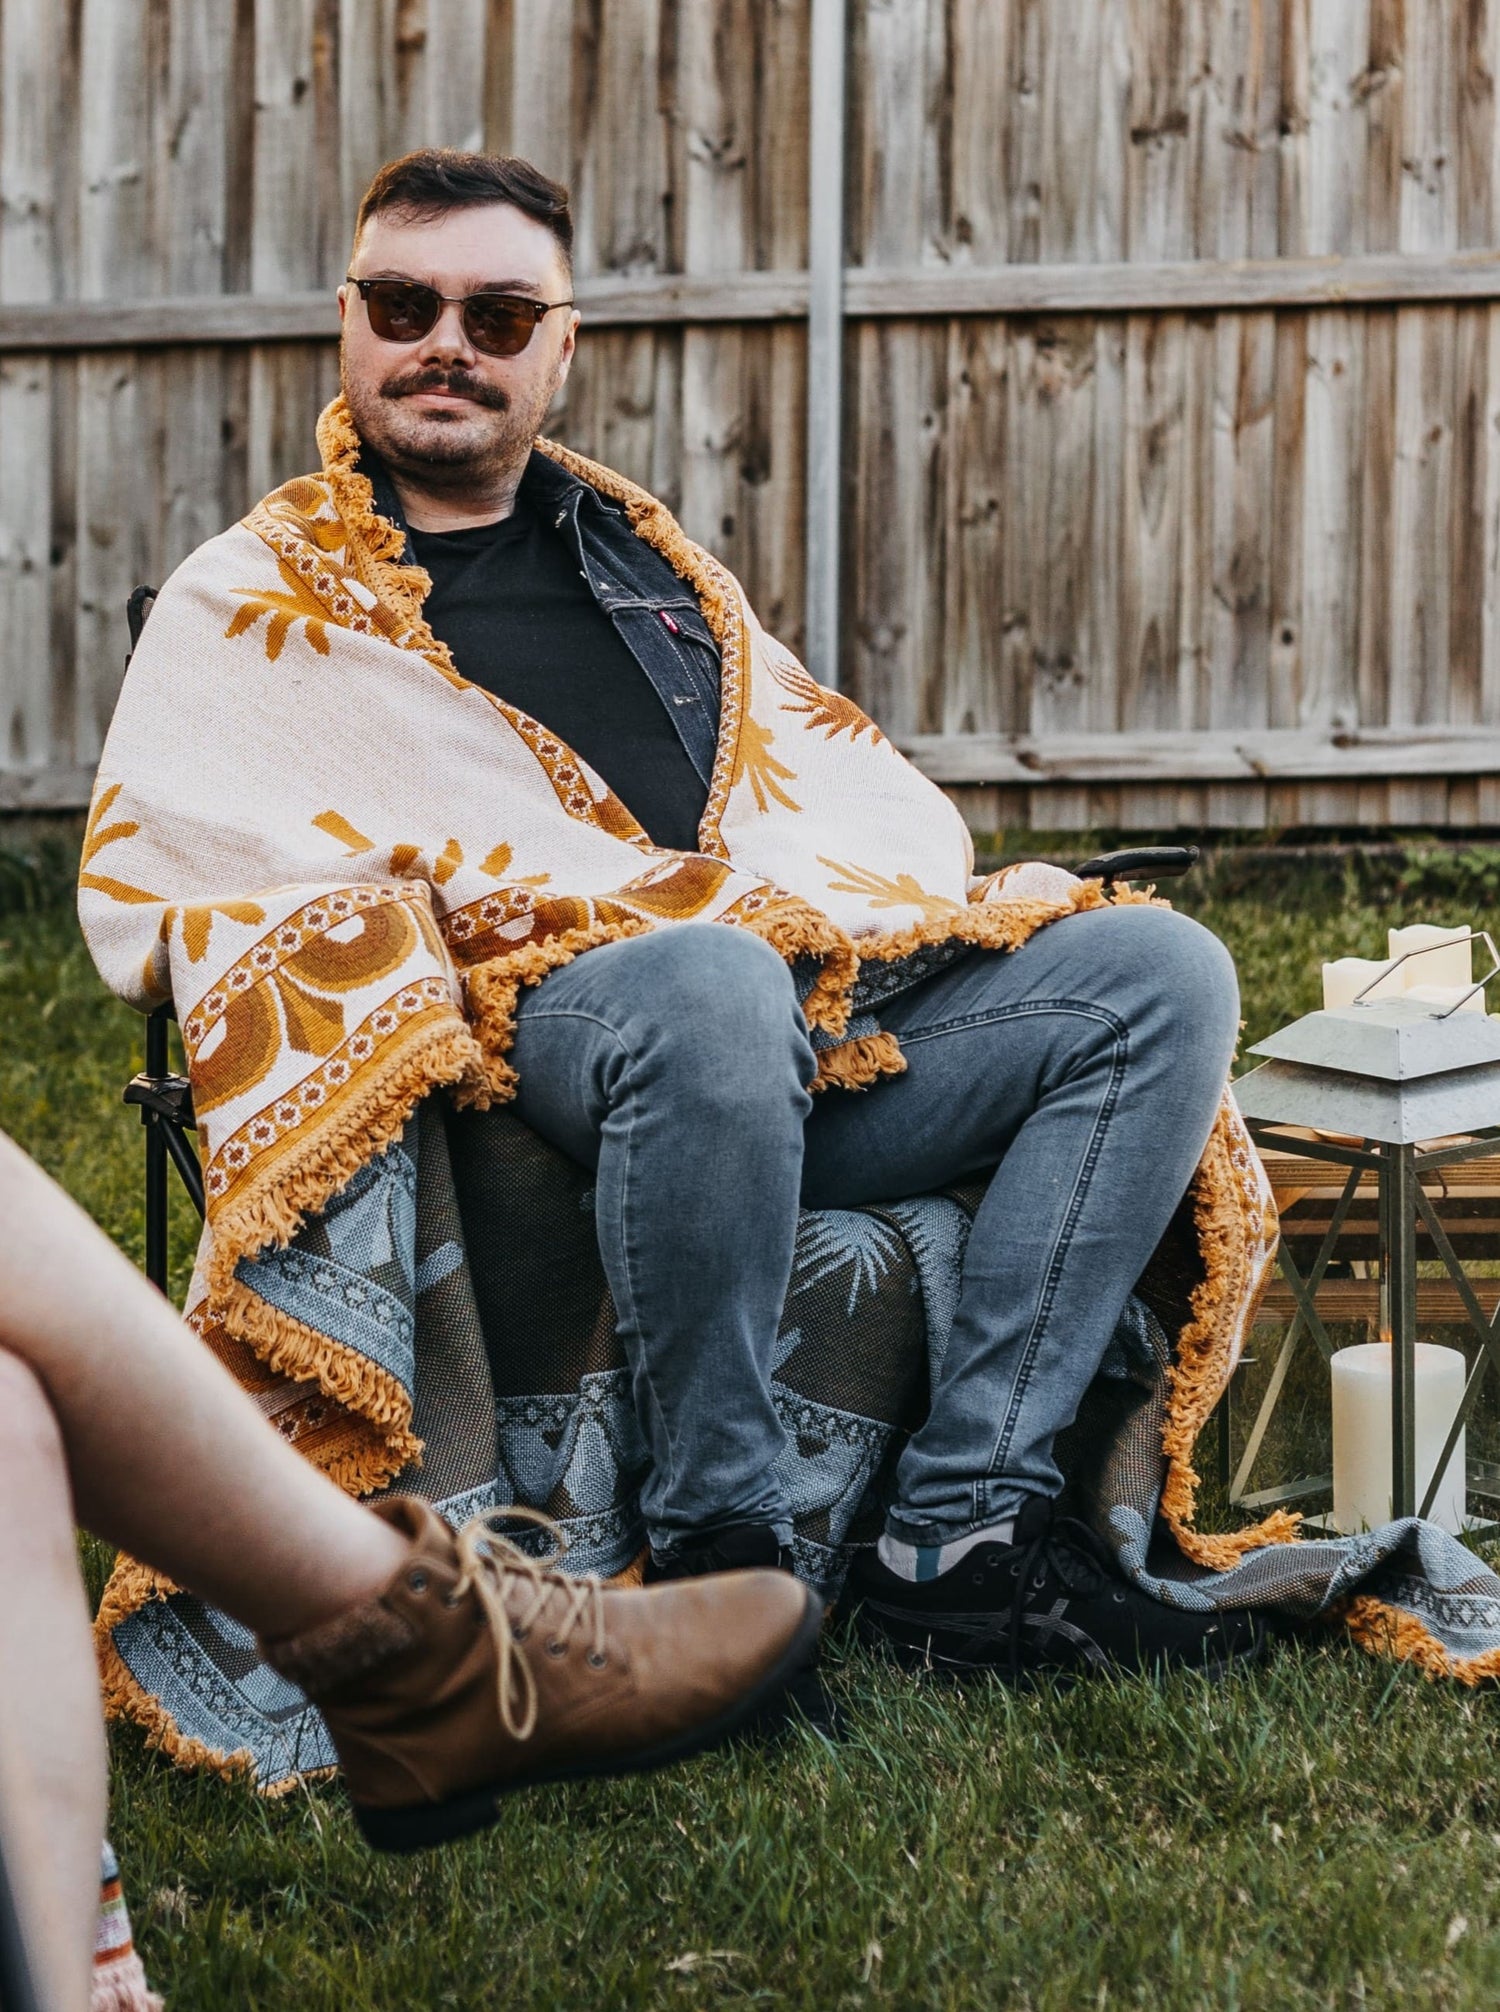 Man rugged up in Endless Summer throw blanket to keep warm while seated on camping chair in backyard party